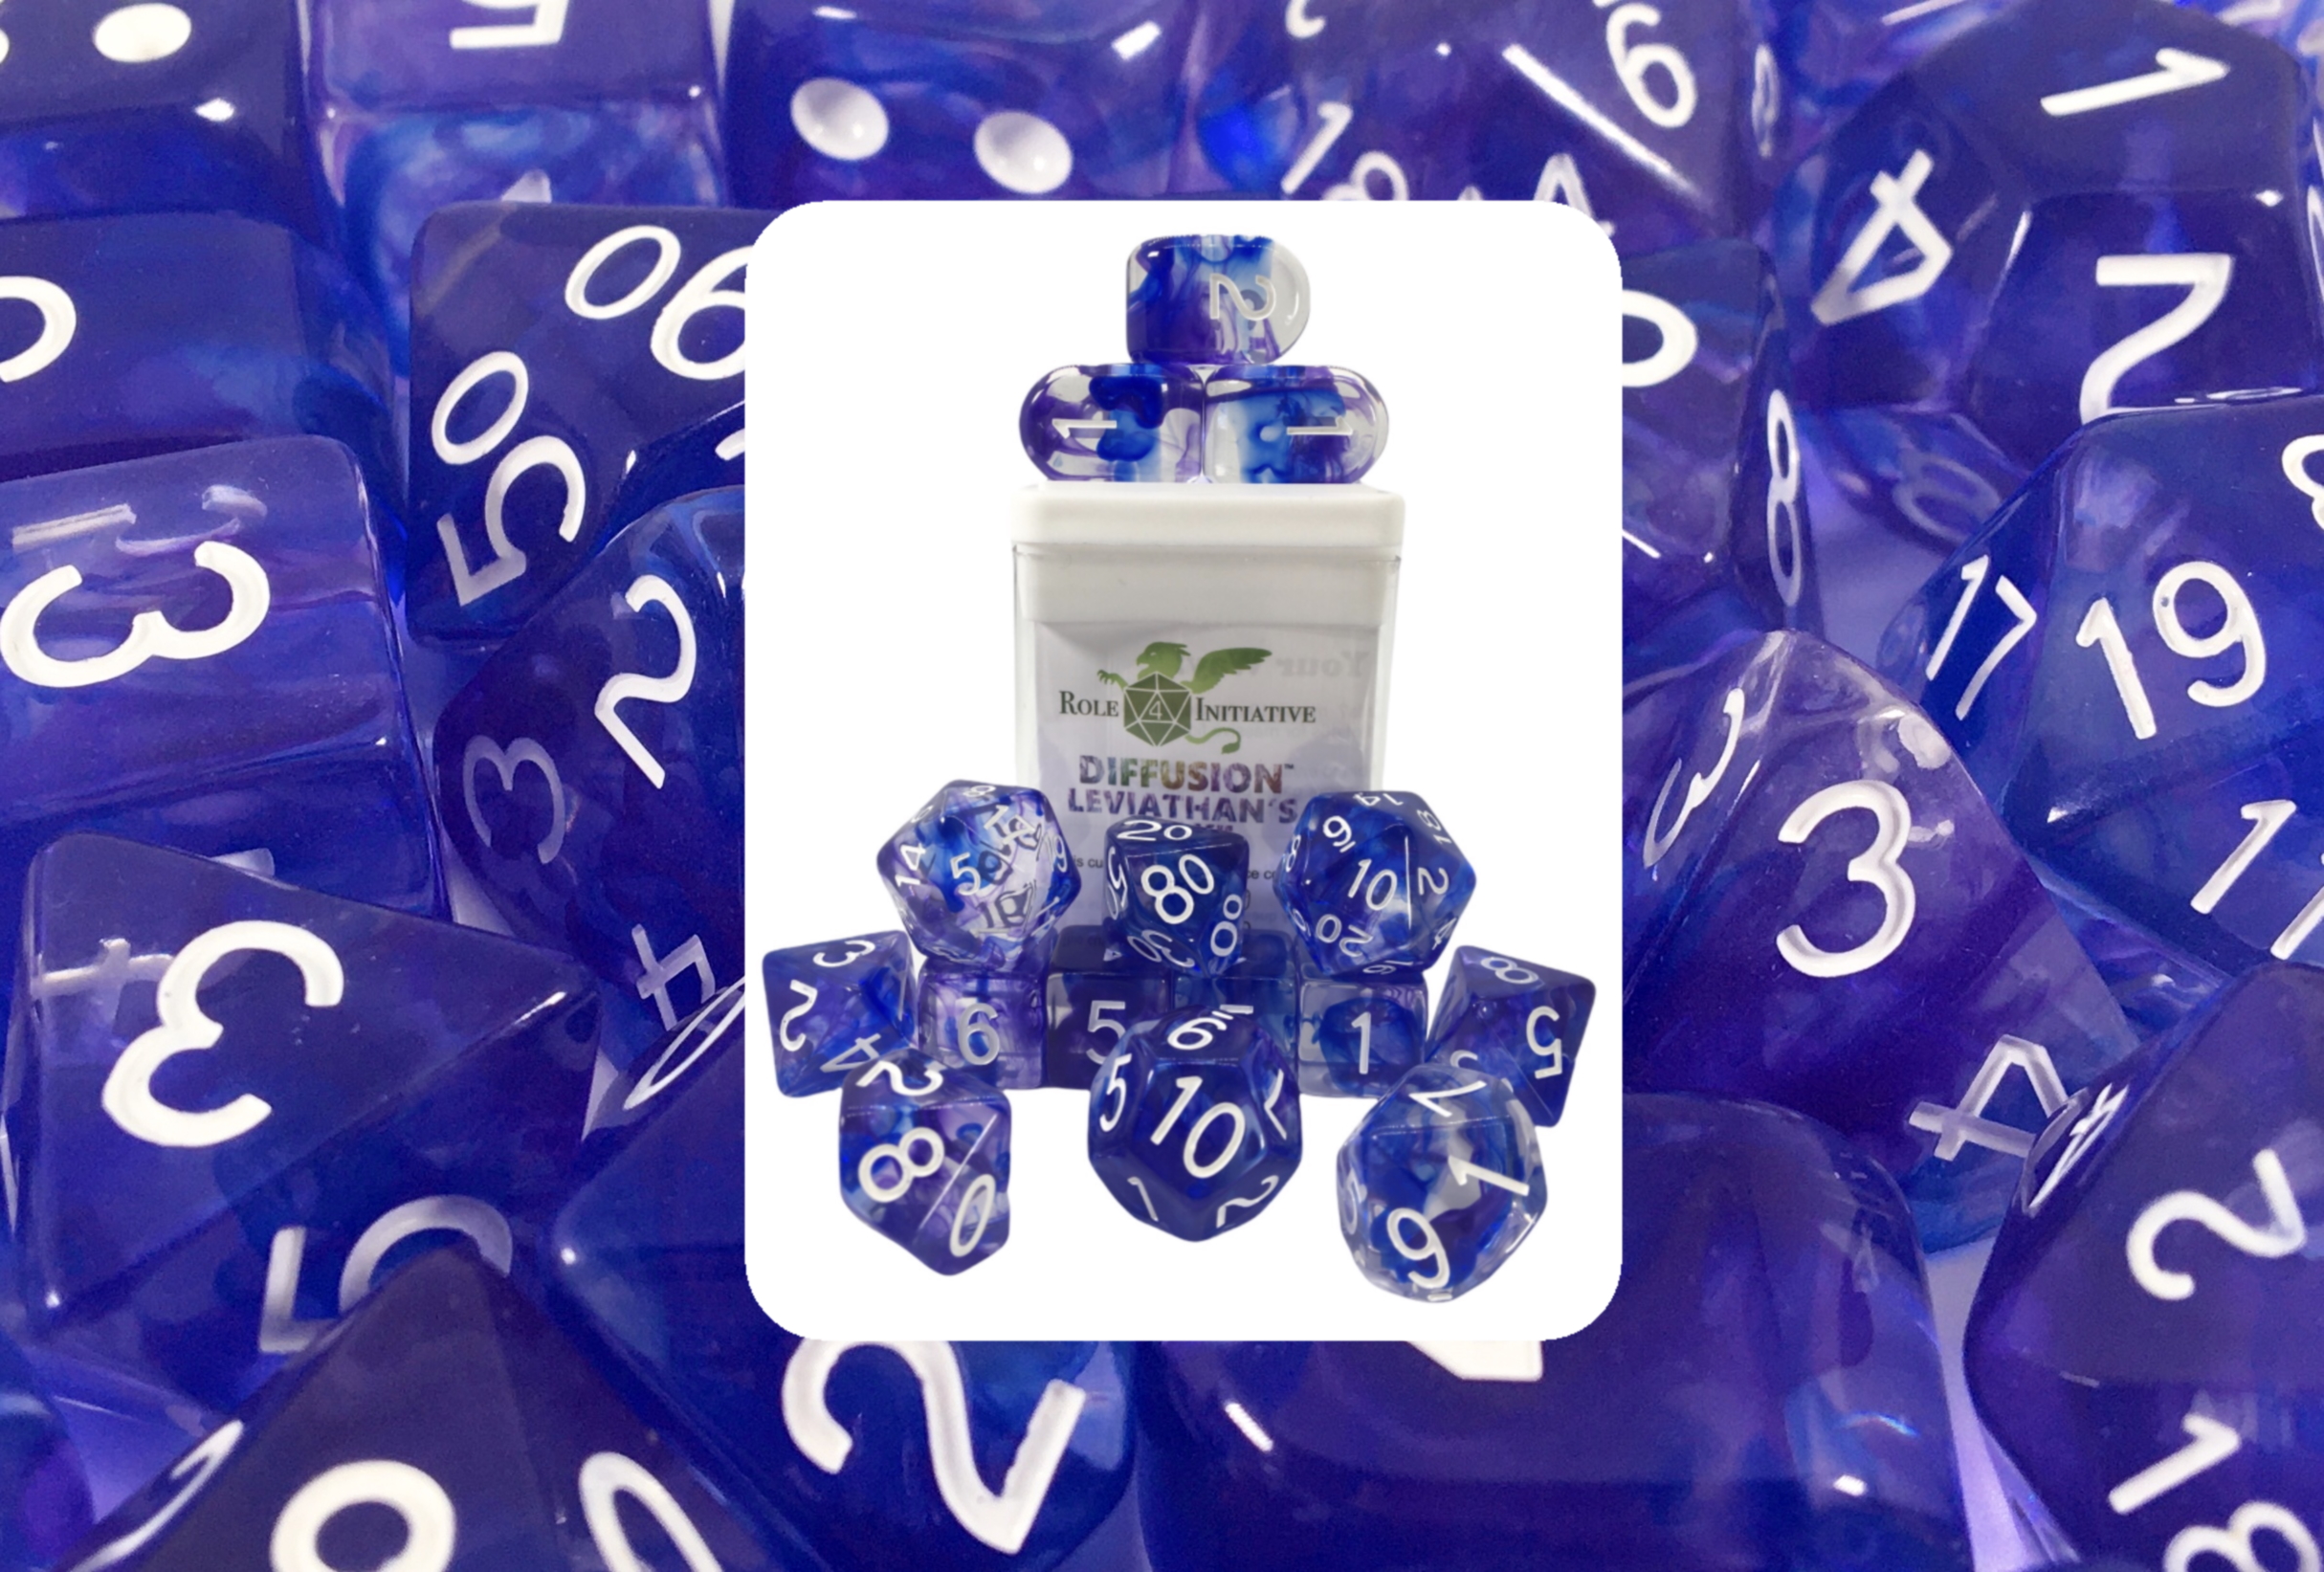 Role 4 Initiative: Polyhedral 15 Dice Set: Diffusion Leviathans Wake 